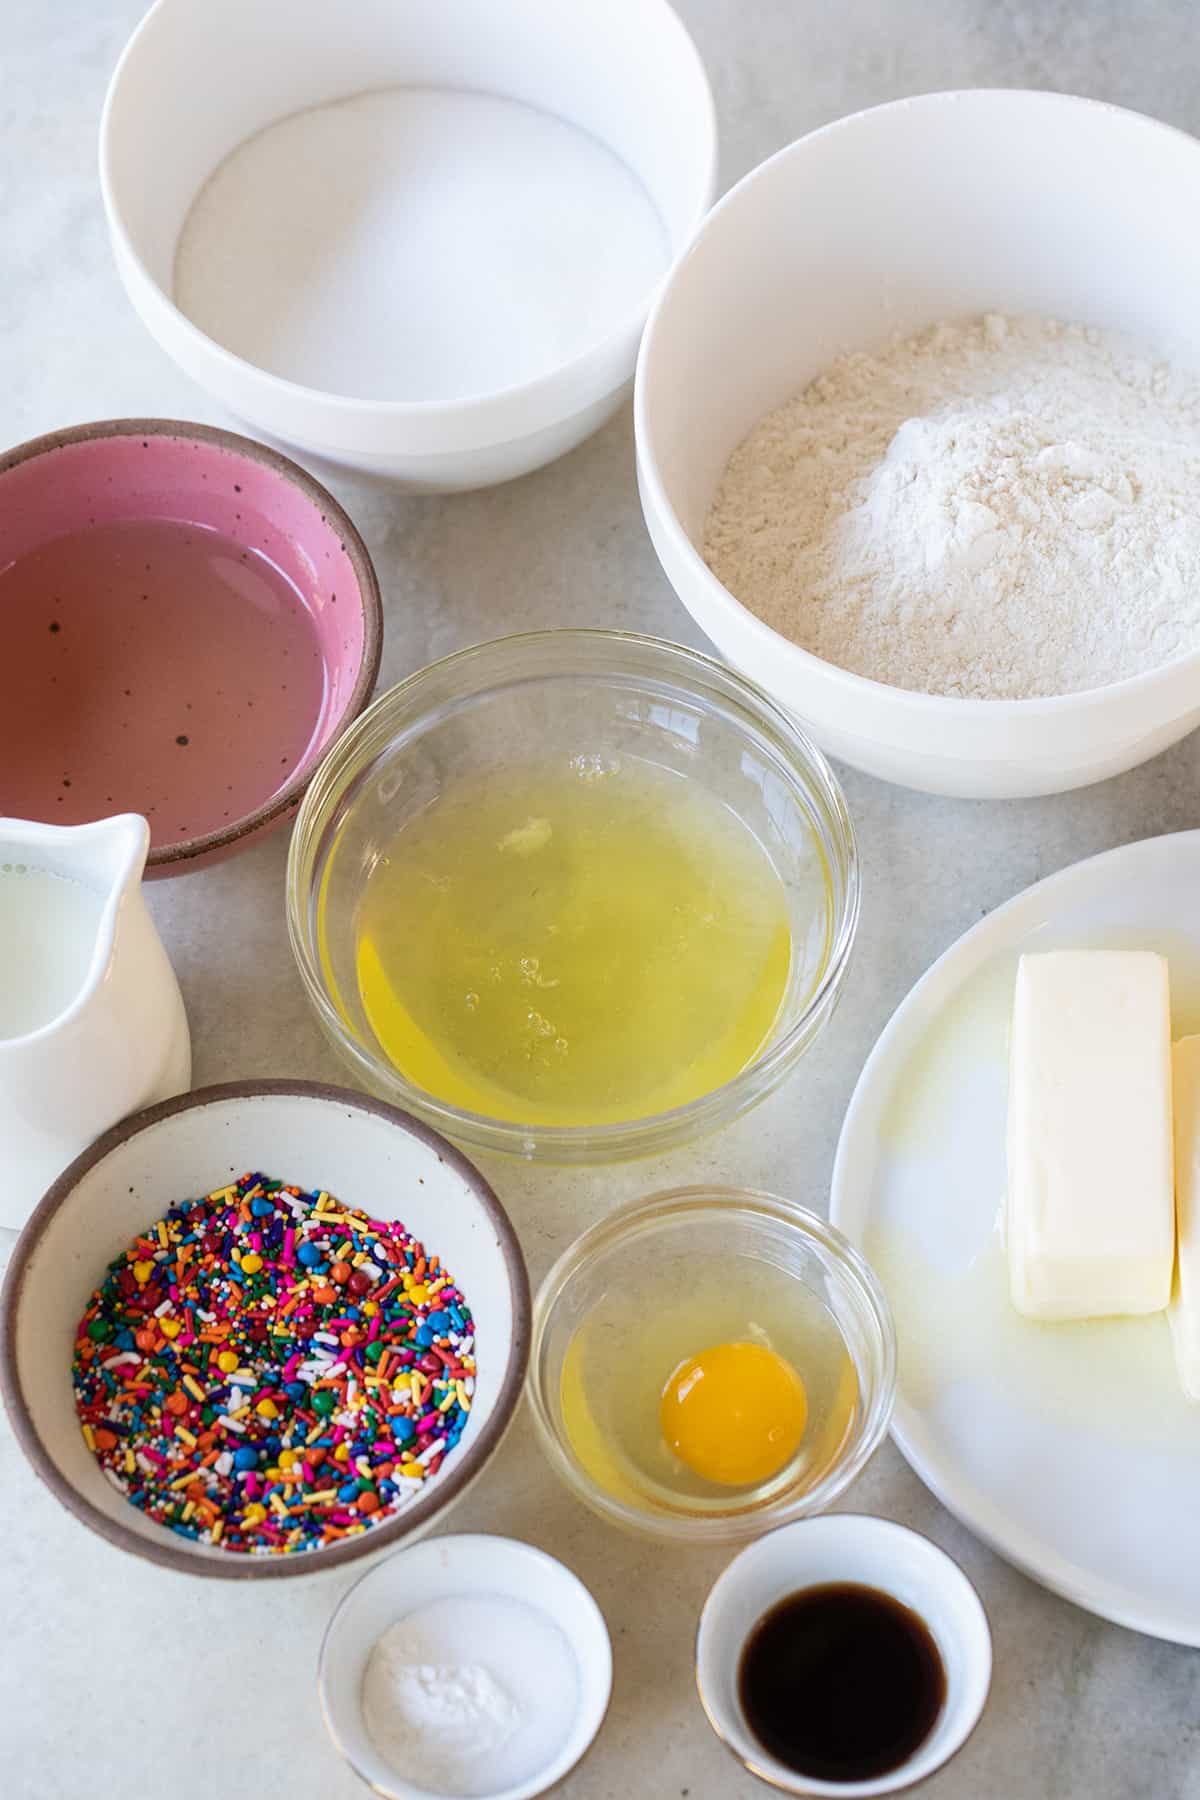 Oil, eggs, sugar, vanilla extract, flour, butter, milk and sprinkles in small bowls.